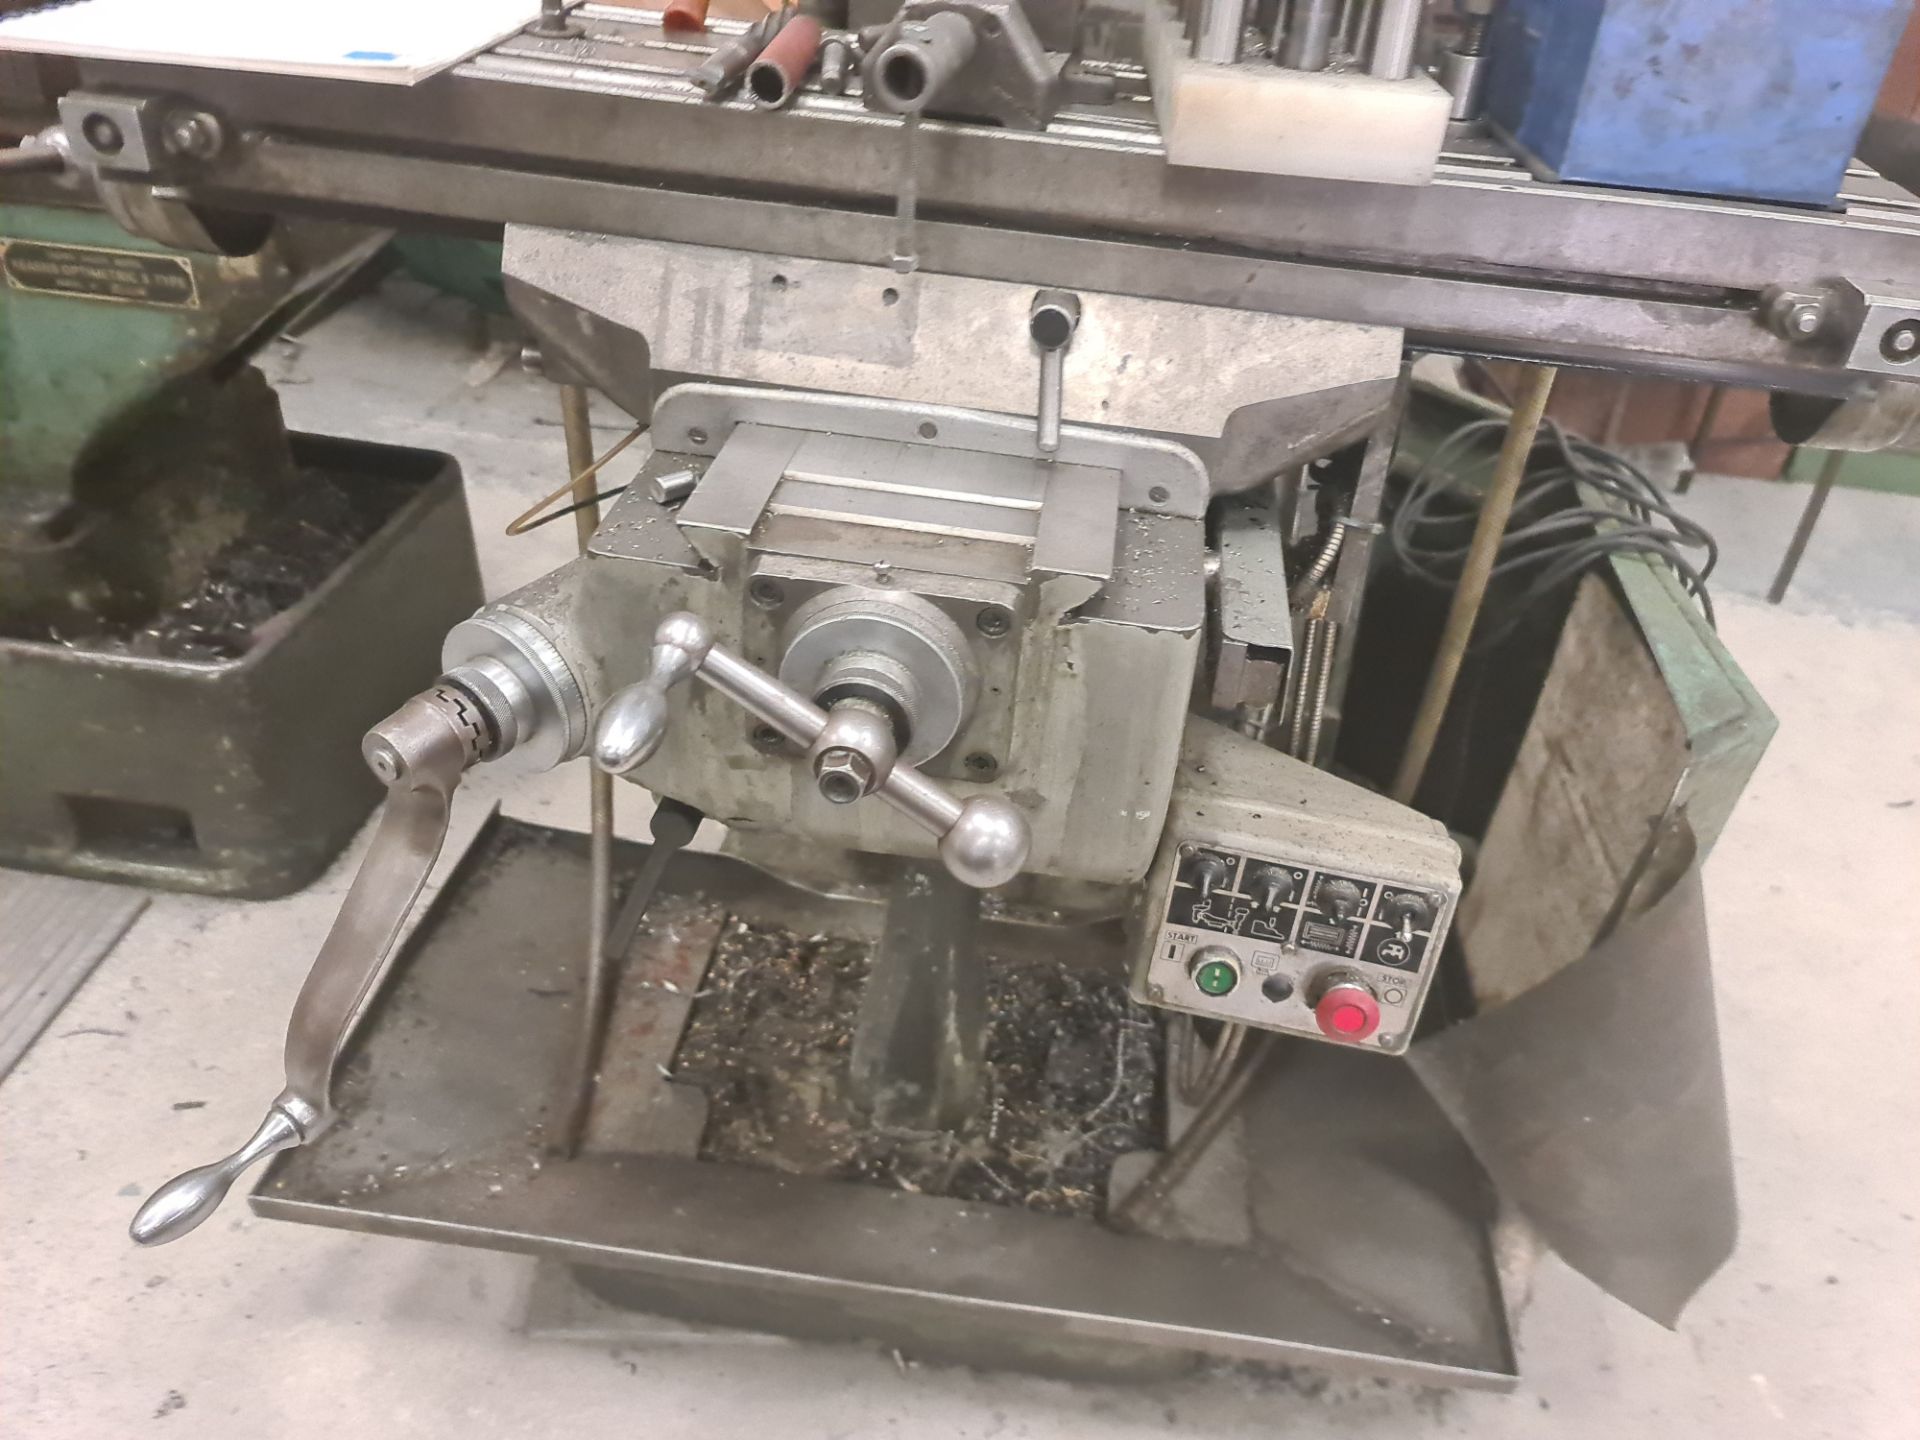 Bridgeport series 1 2hp turret mill with Acu-Rite DRO. Includes the tooling located on the machine - Image 2 of 27